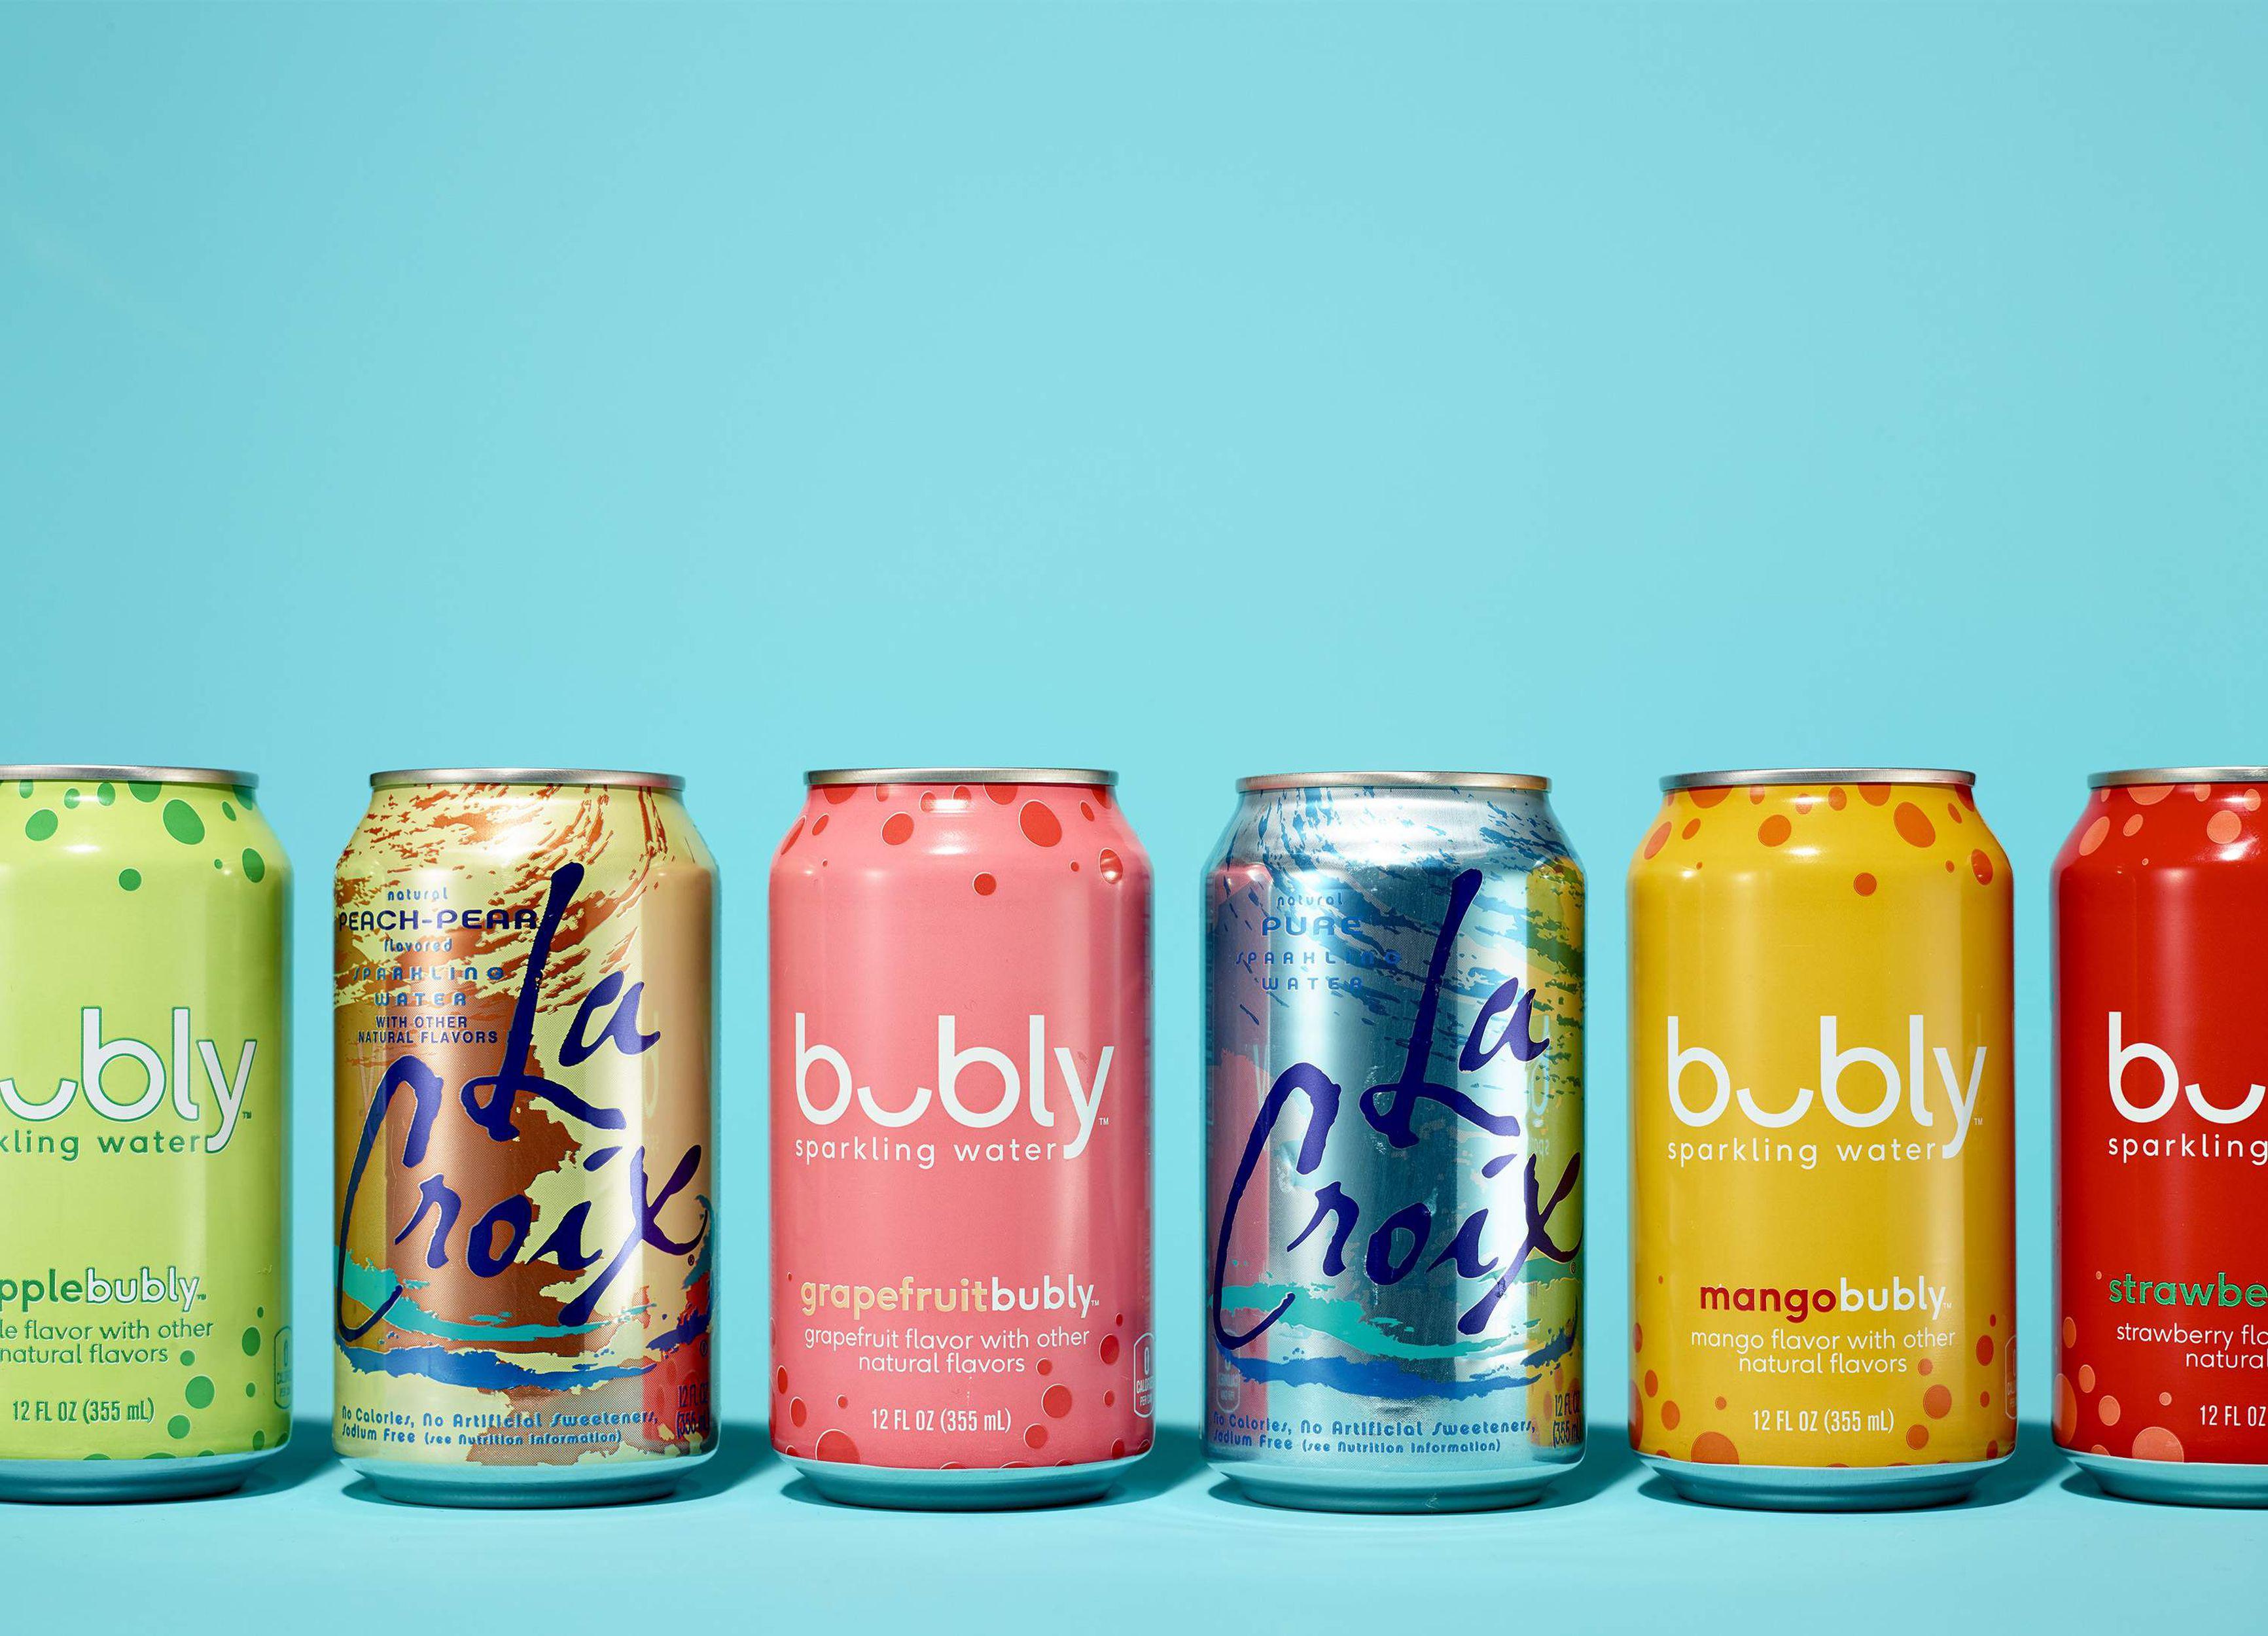 We critique the best and worst brands of sparkling water